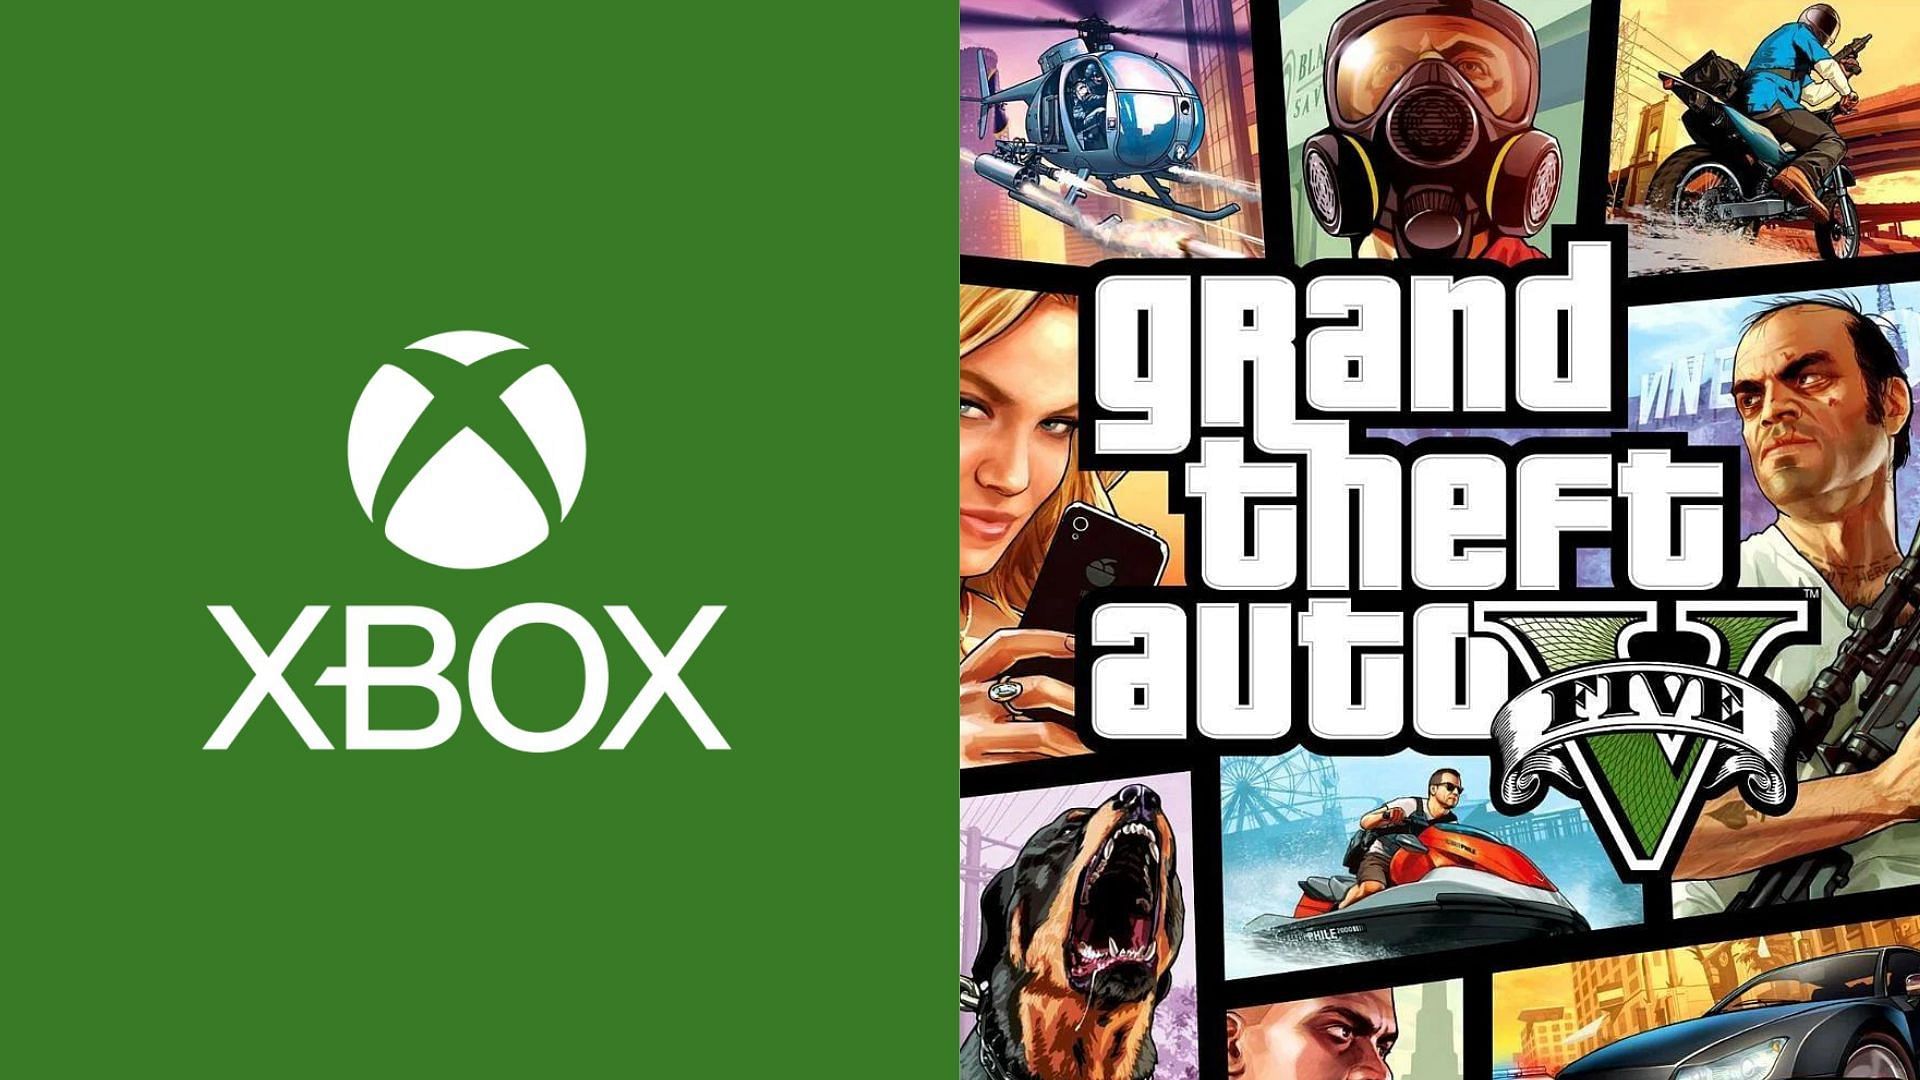 GTA 5 became the 3rd most played game on Xbox Series X/S